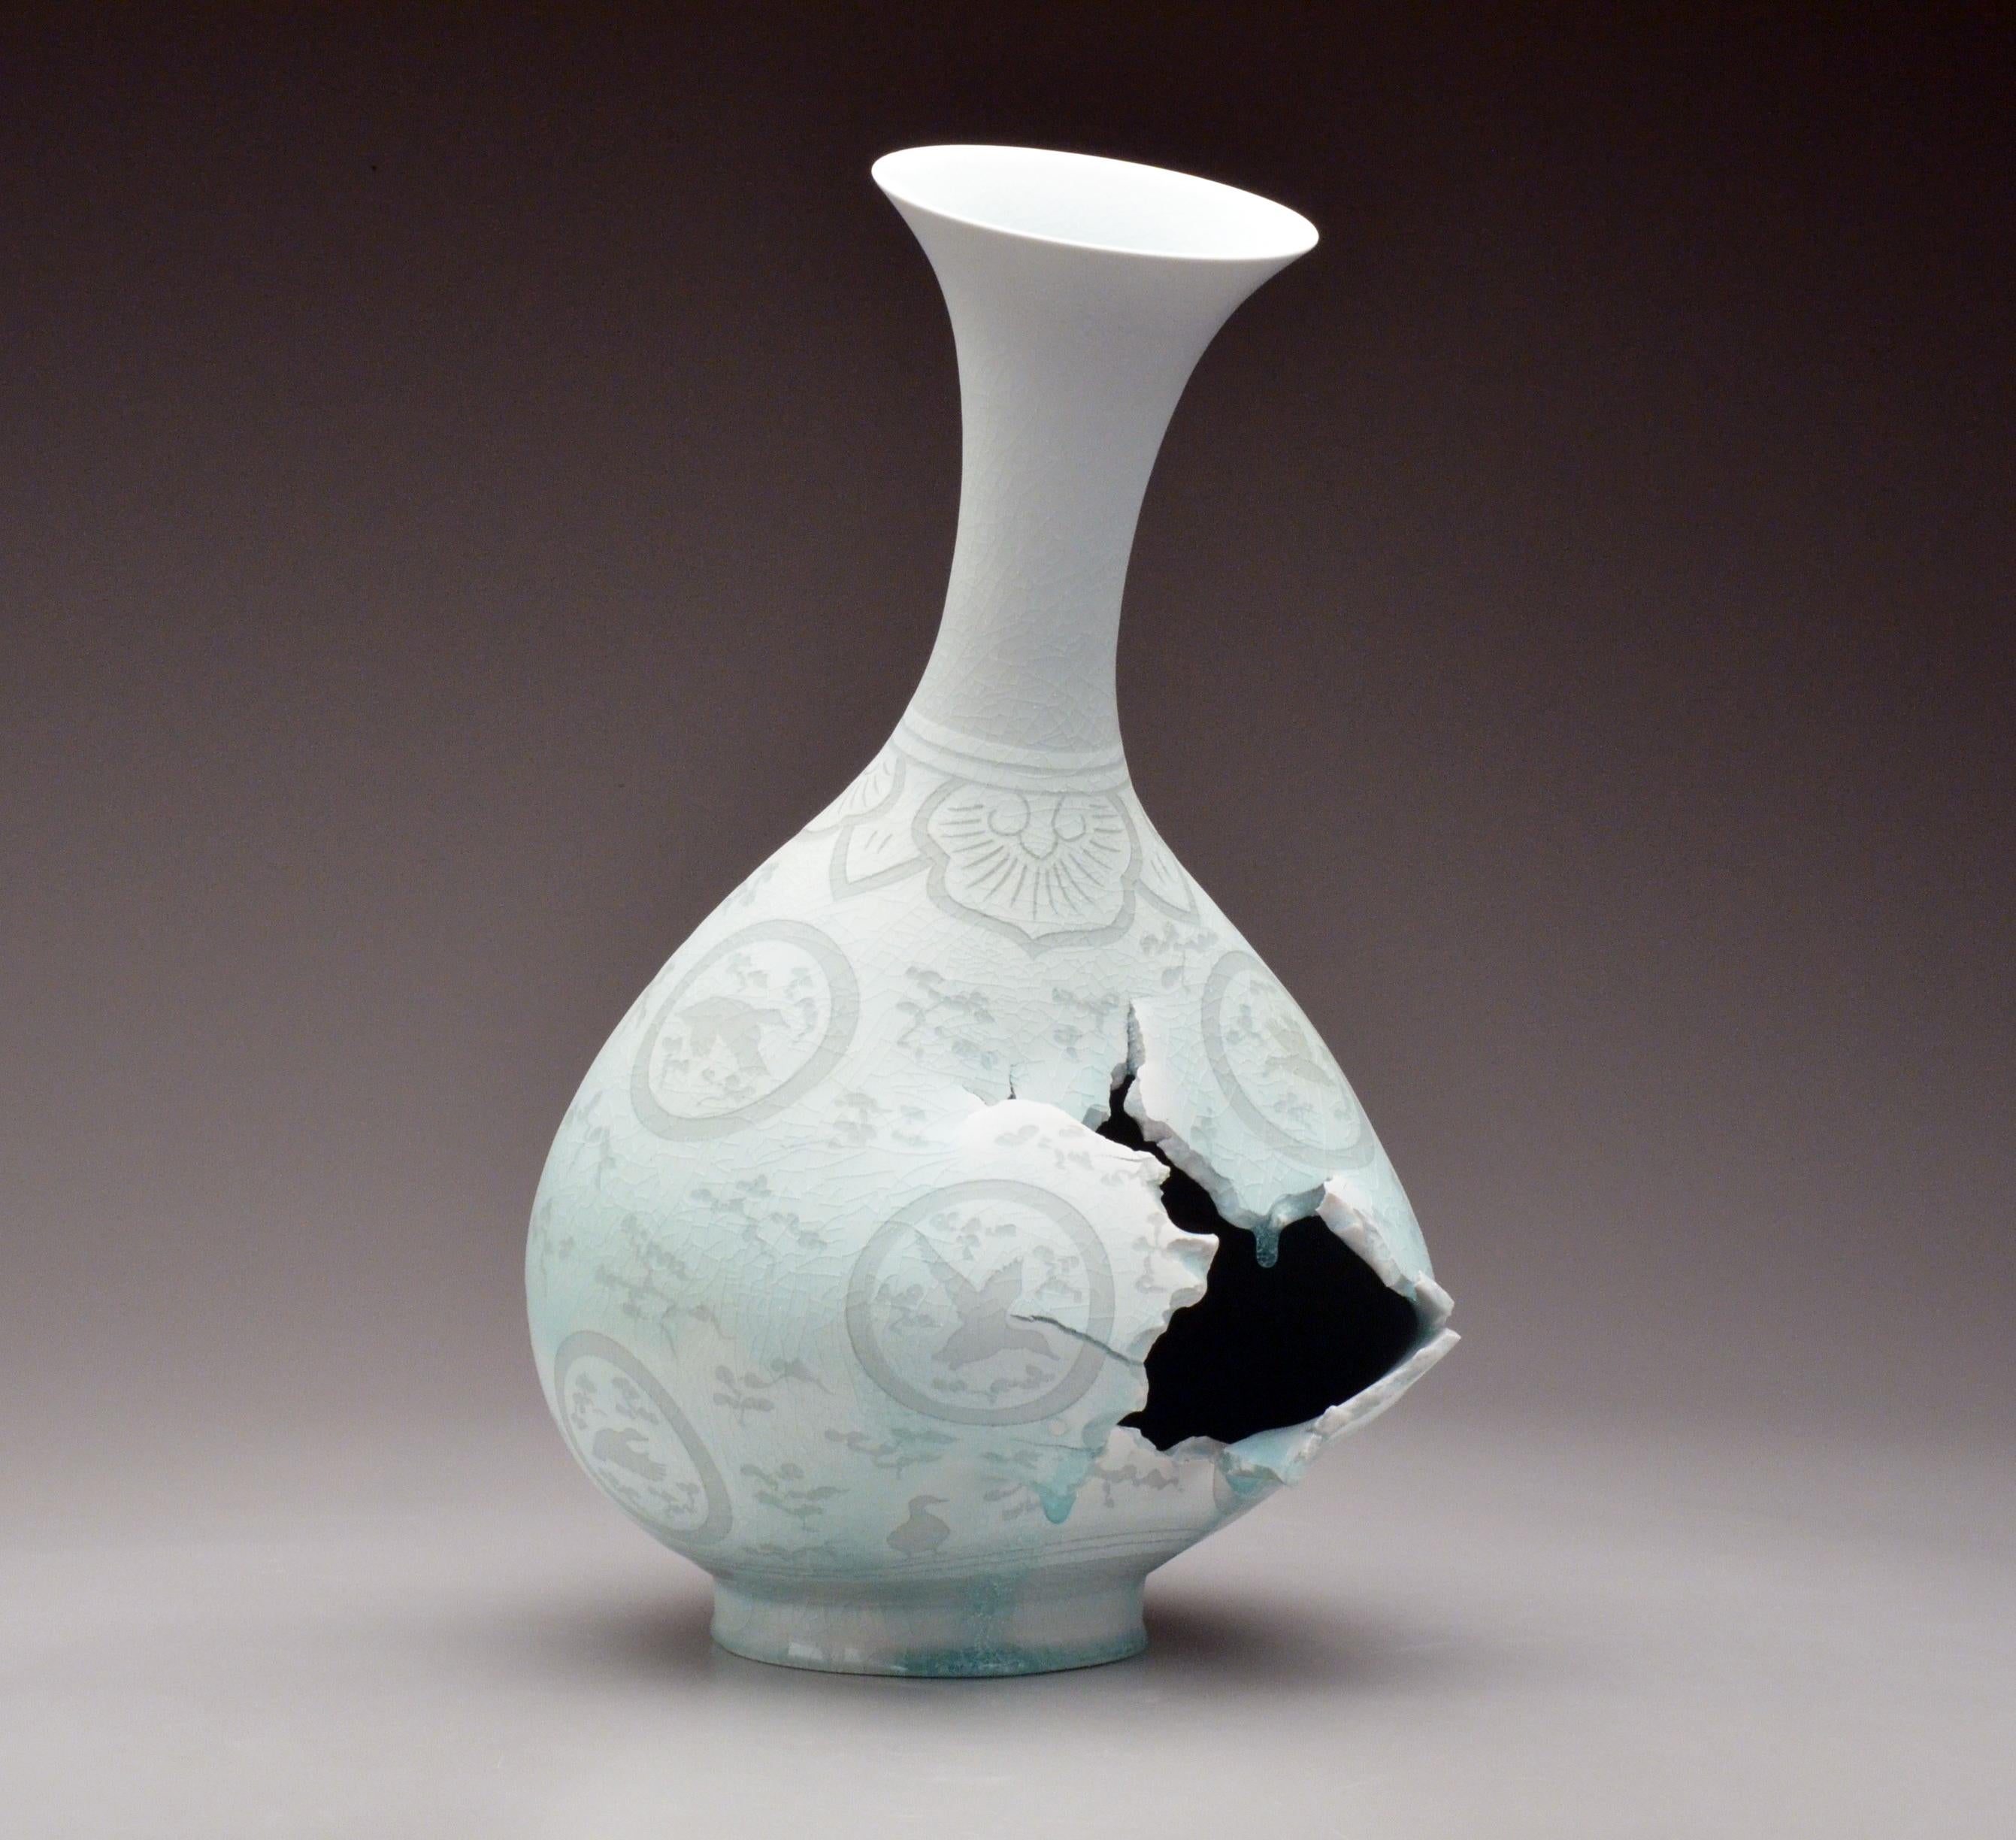 Steven Young Lee is the Resident Artist Director of the Archie Bray Foundation in Helena, Montana. A Chicago native, he received his MFA in Ceramics from the New York State College of Ceramics at Alfred University. He has lectured and taught at